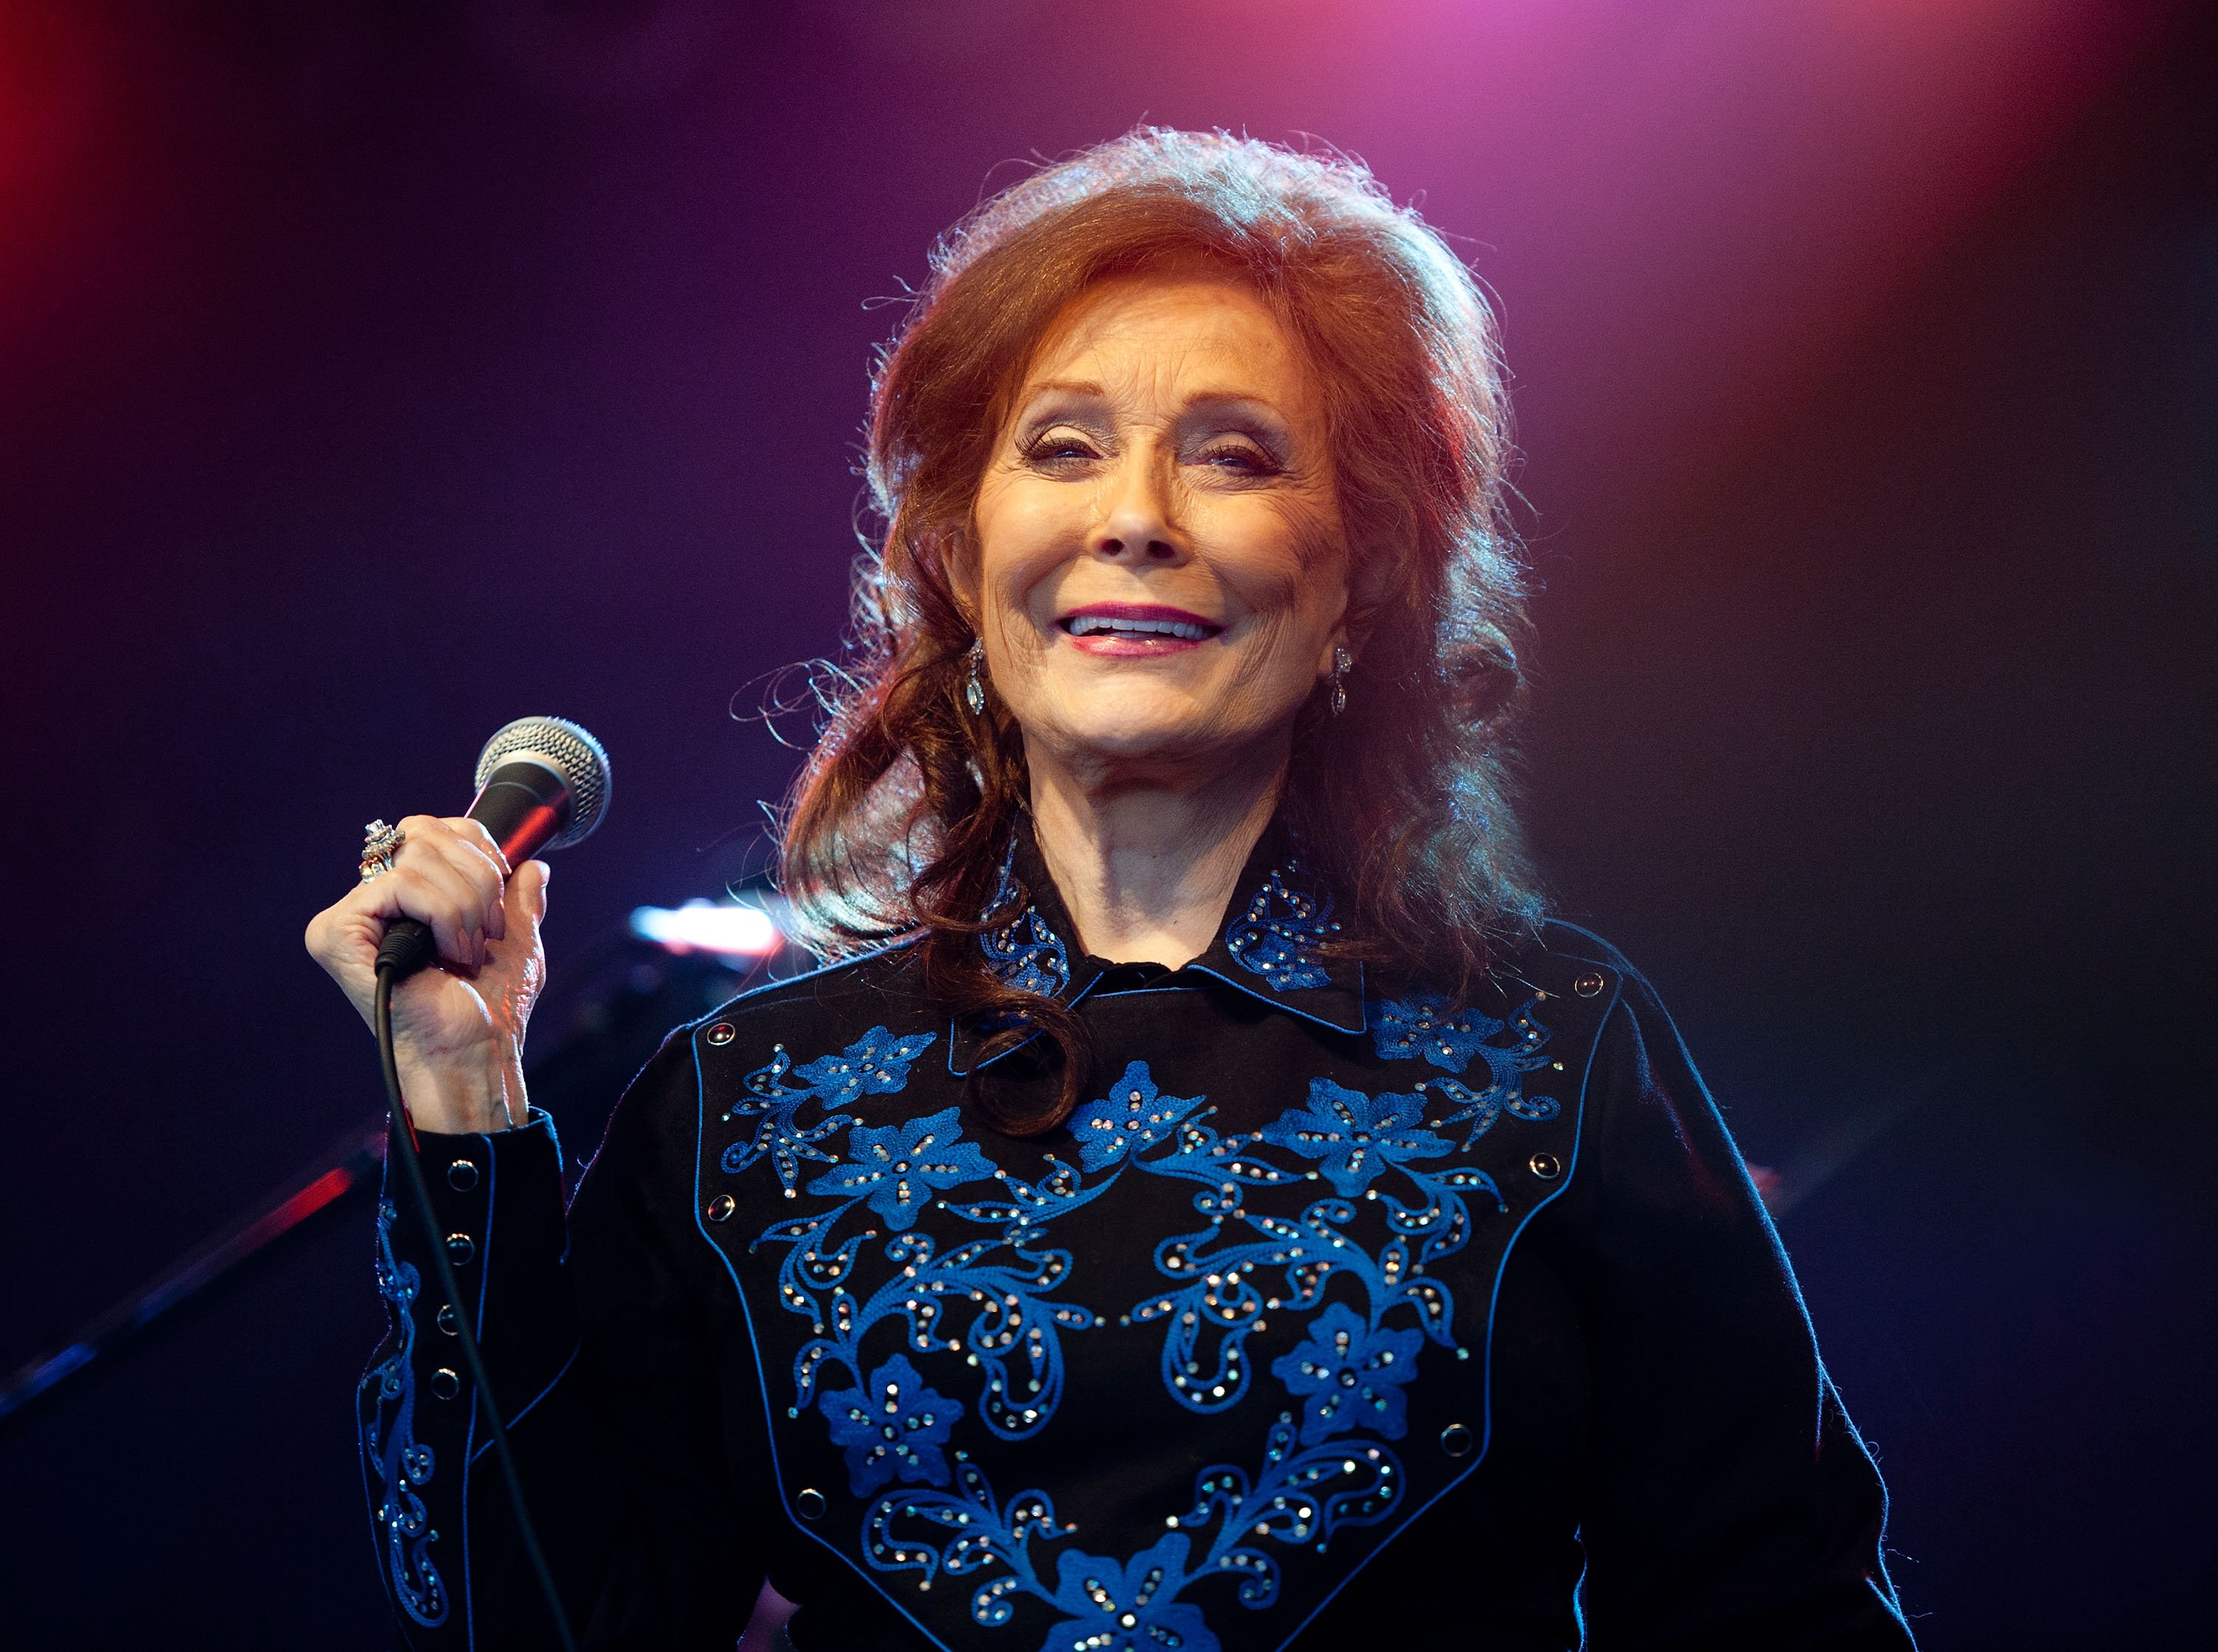 Loretta Lynn performs during the 2011 Bonnaroo Music and Arts Festival on June 11, 2011, in Manchester, Tennessee. | Source: Getty Images